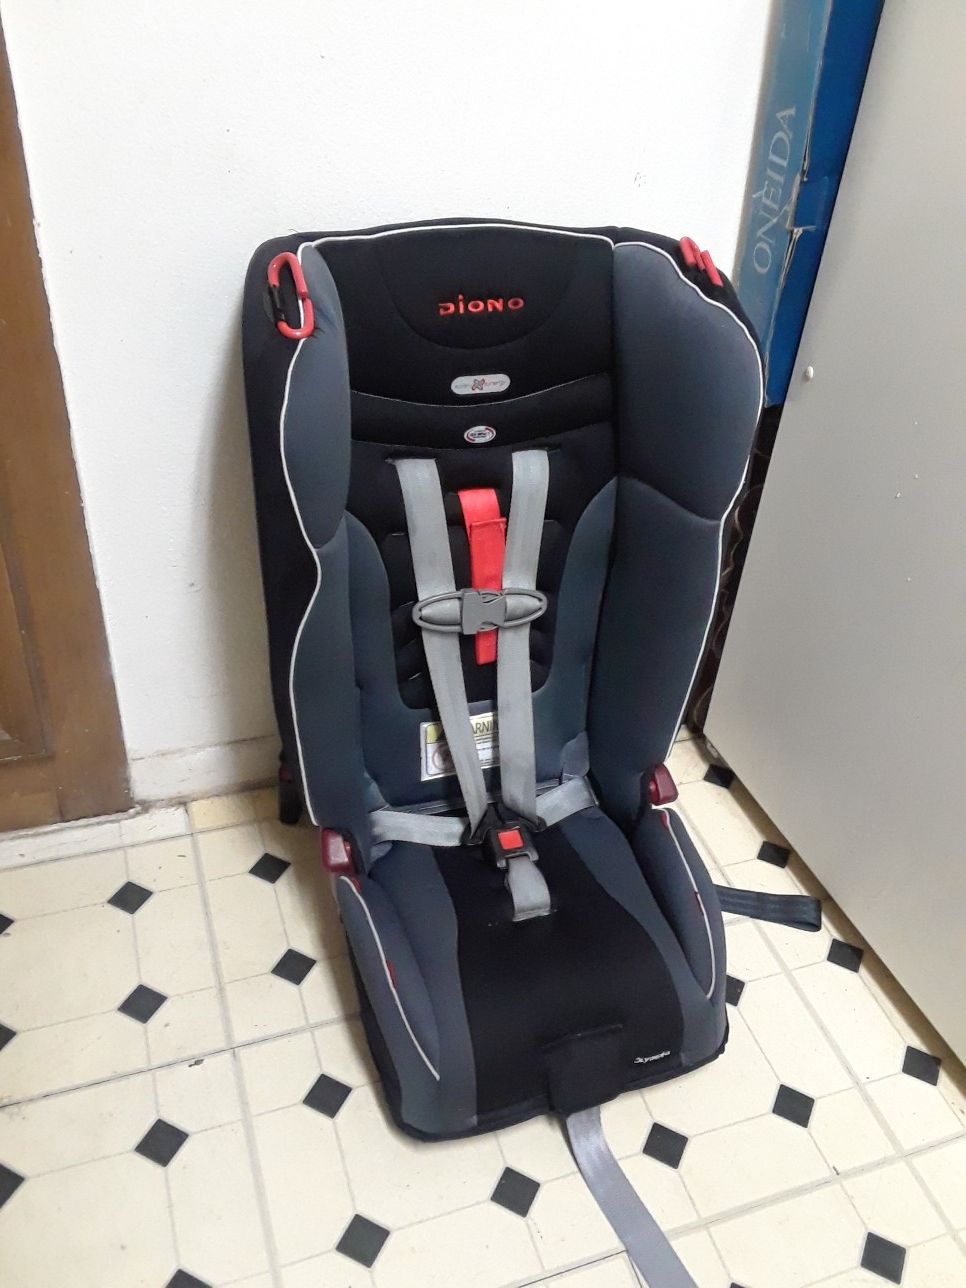 DIONO CAR SEAT. IN GREAT CONDITION